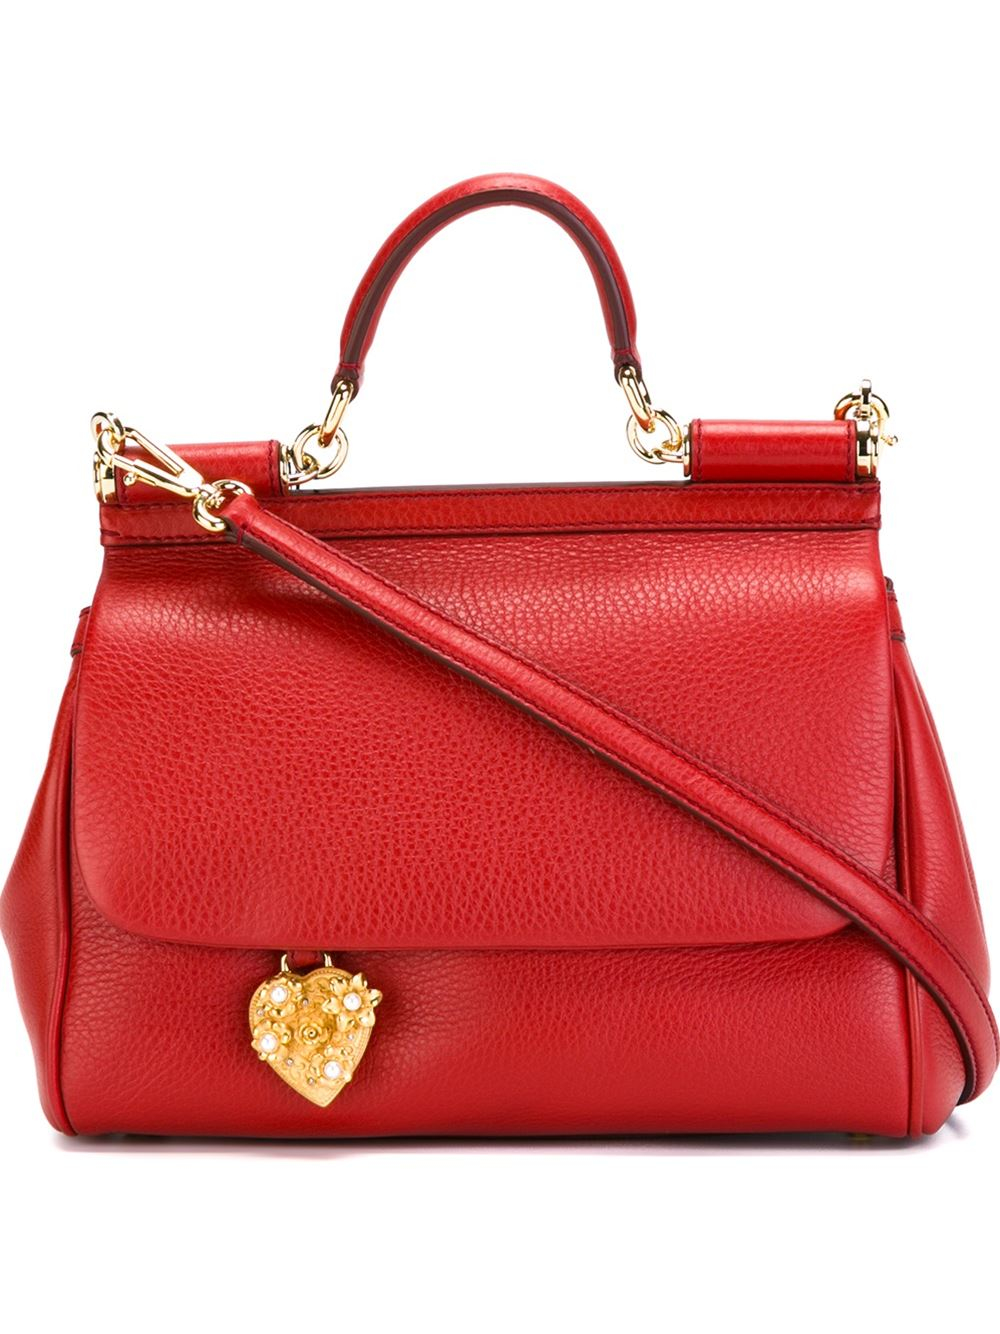 Lyst - Dolce & Gabbana Small Sicily Tote in Red